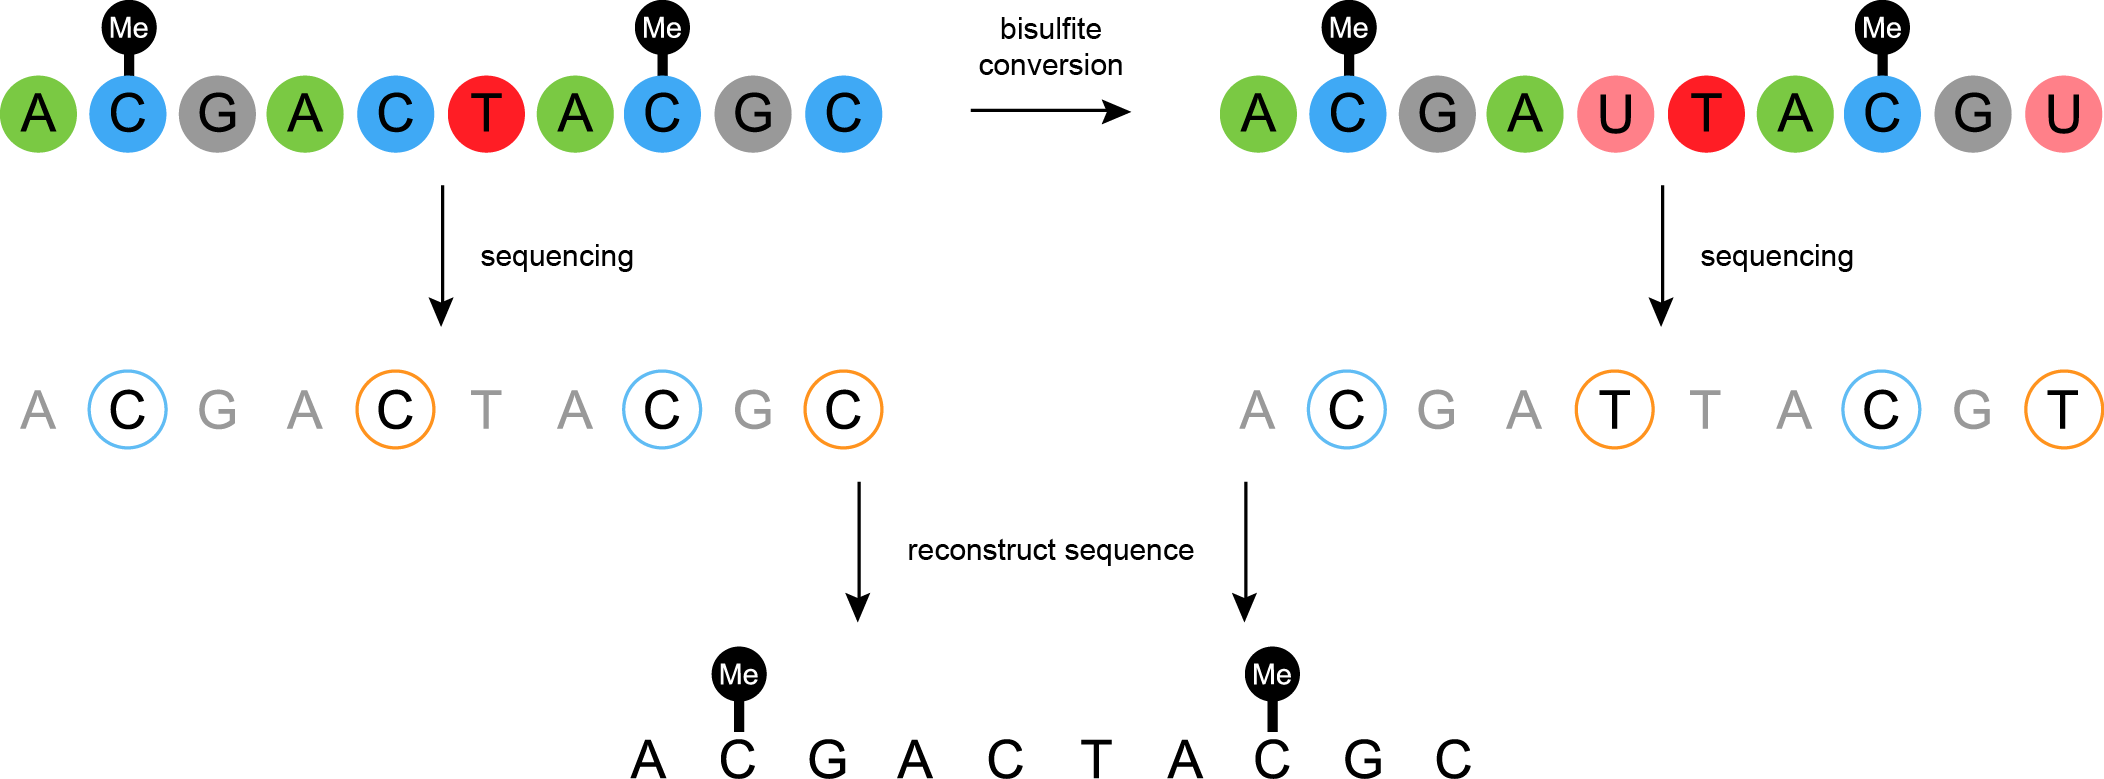 Cartoon of a methlated gene sequence and bisulfite conversion  replacing a C with a U. Below that is sequenced and the resut is reconstructed to figure out which Cs were methylated (because they weren't replaced with Us.)